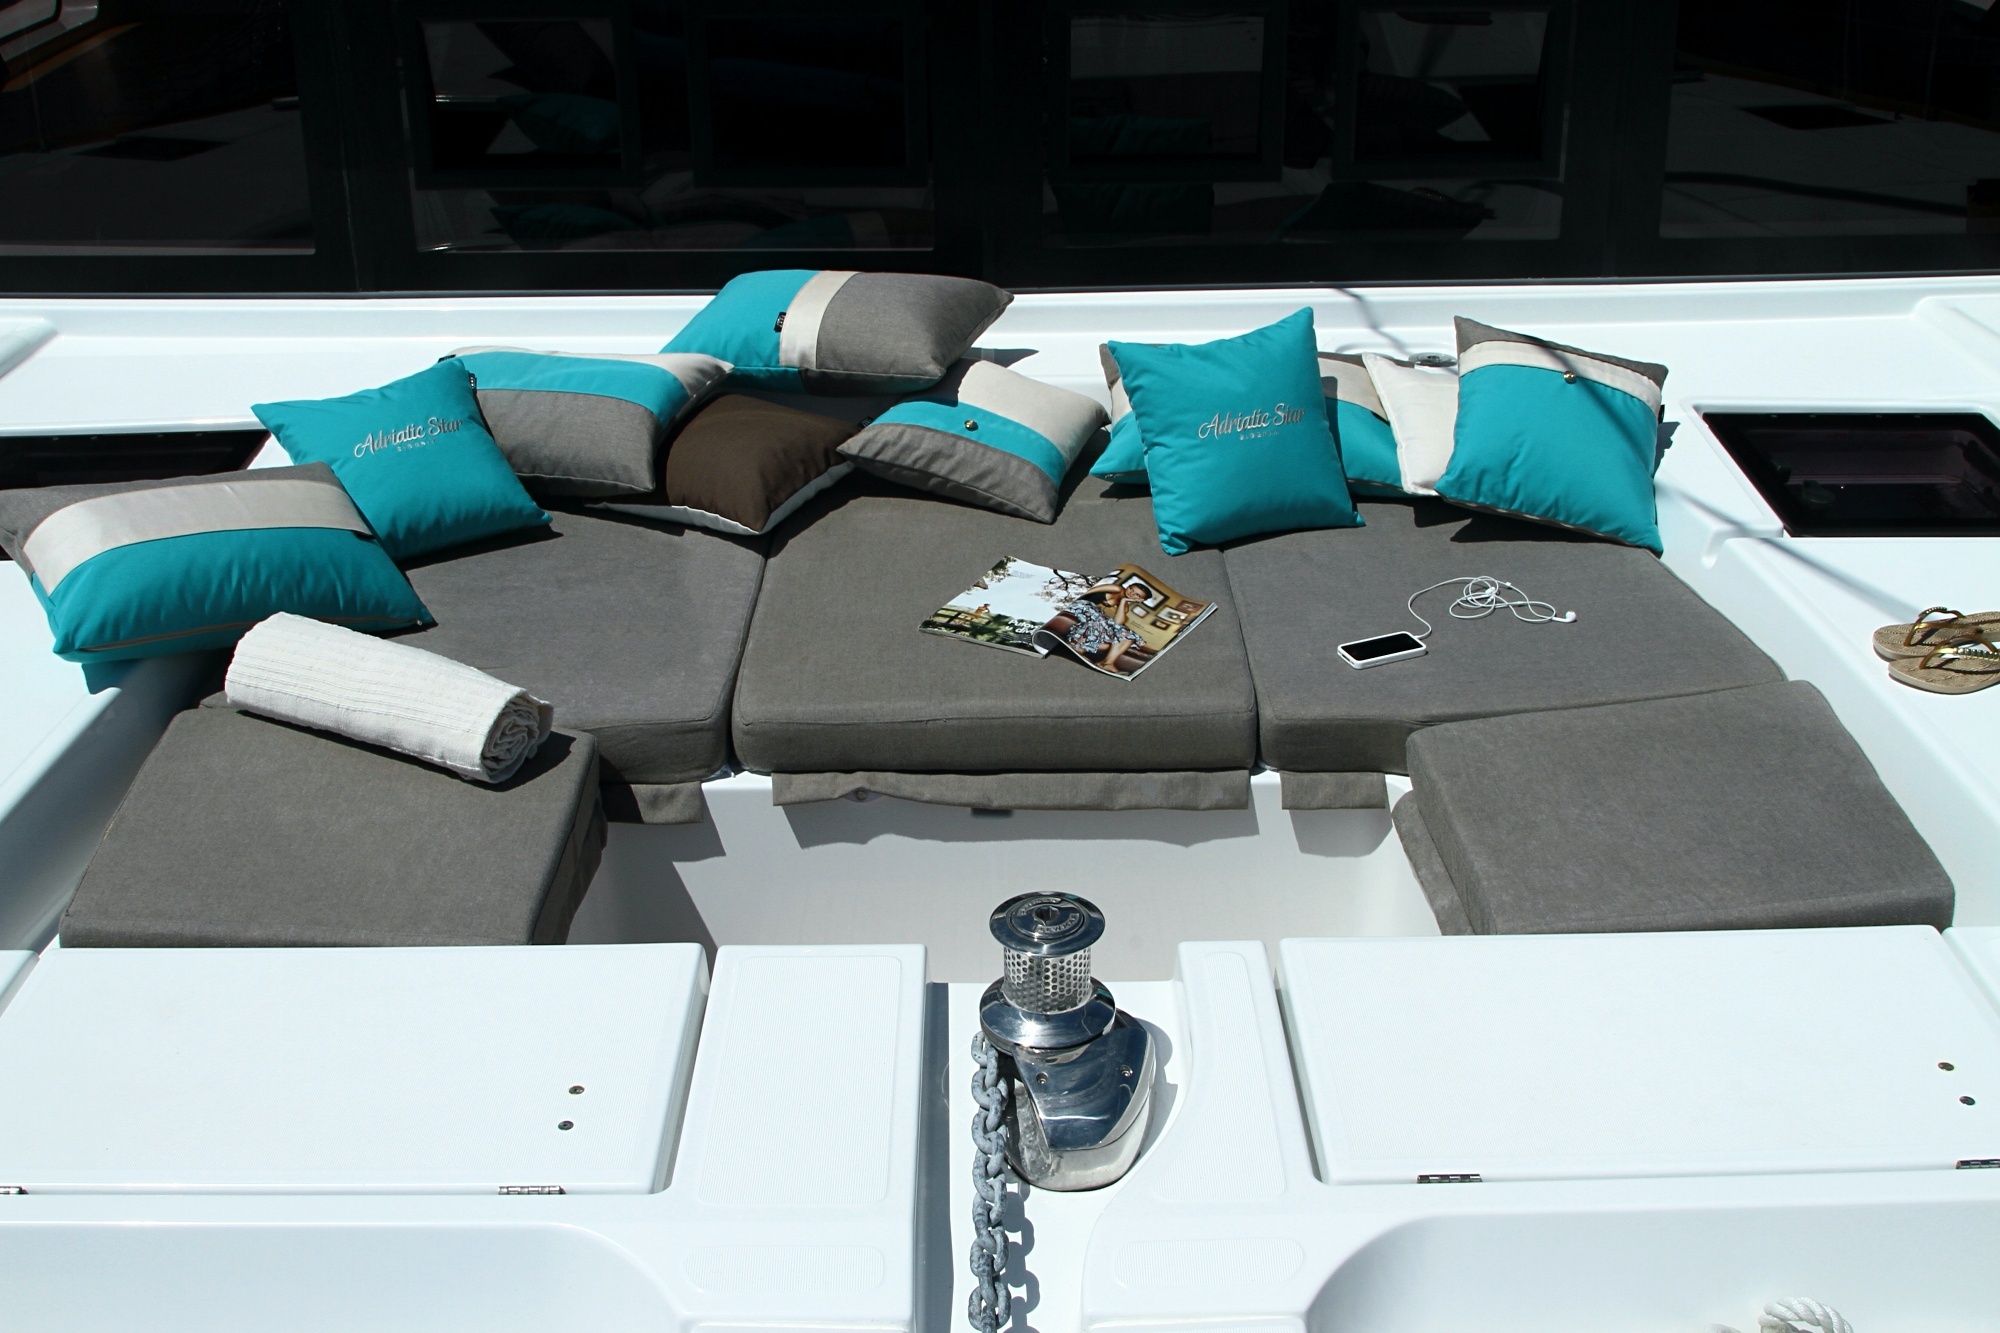 Complete new upholstery cushions in U-shaped seating area in Lagoon 52 F forward cockpit, with soft pillows for chill zone.